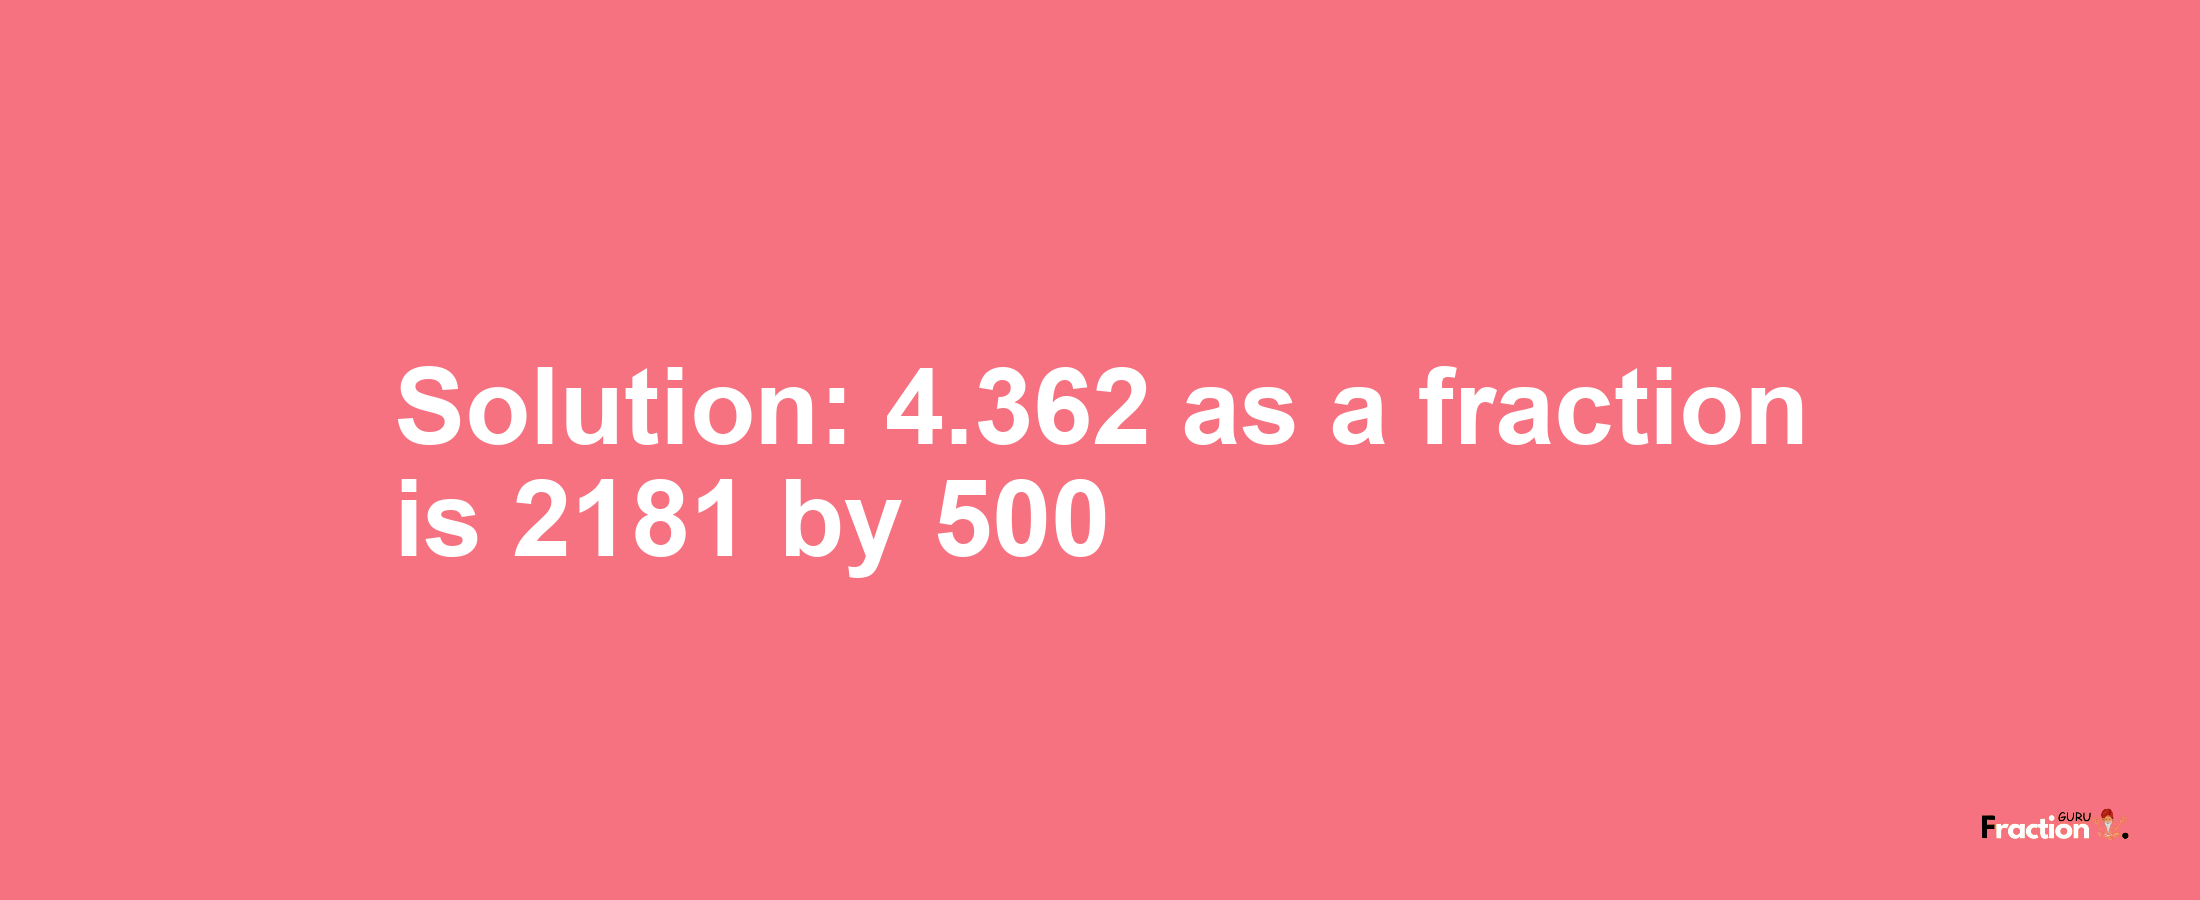 Solution:4.362 as a fraction is 2181/500